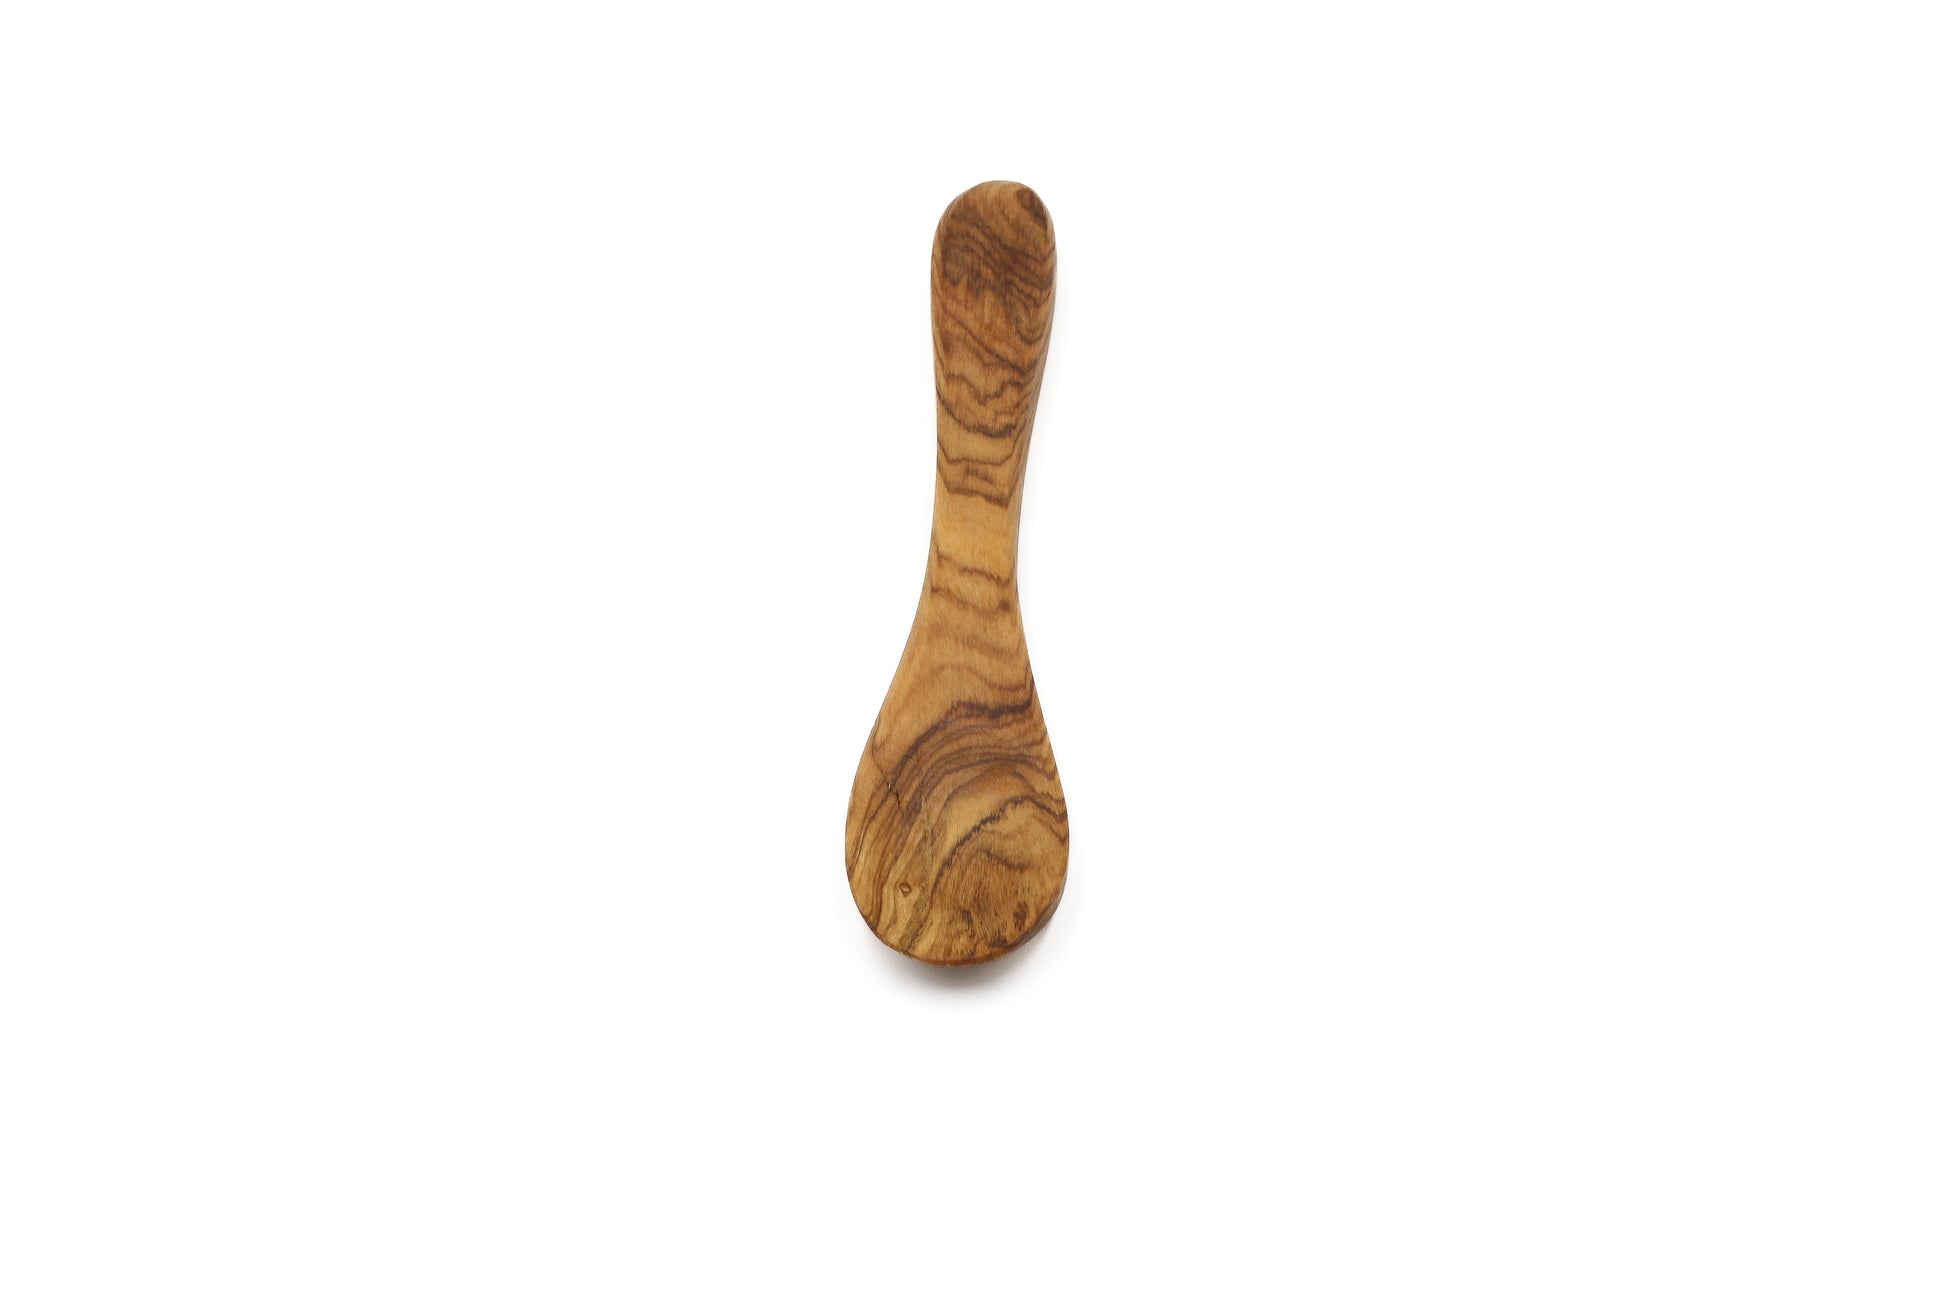 Tiny spoon crafted from olive wood